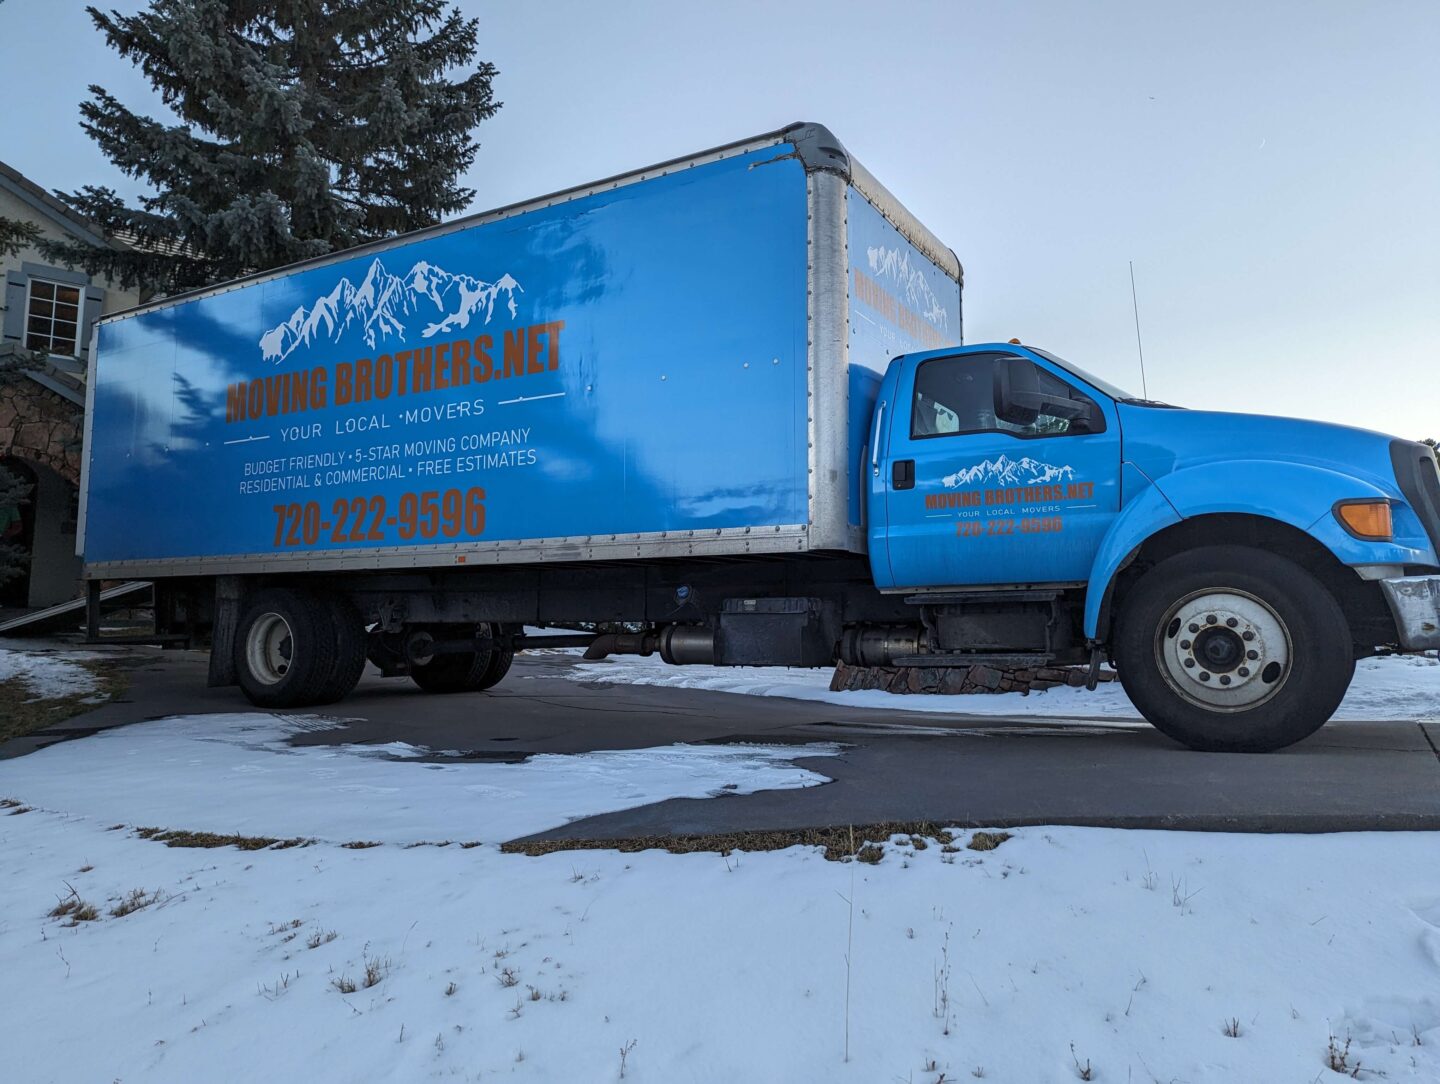 Local Denver movers truck